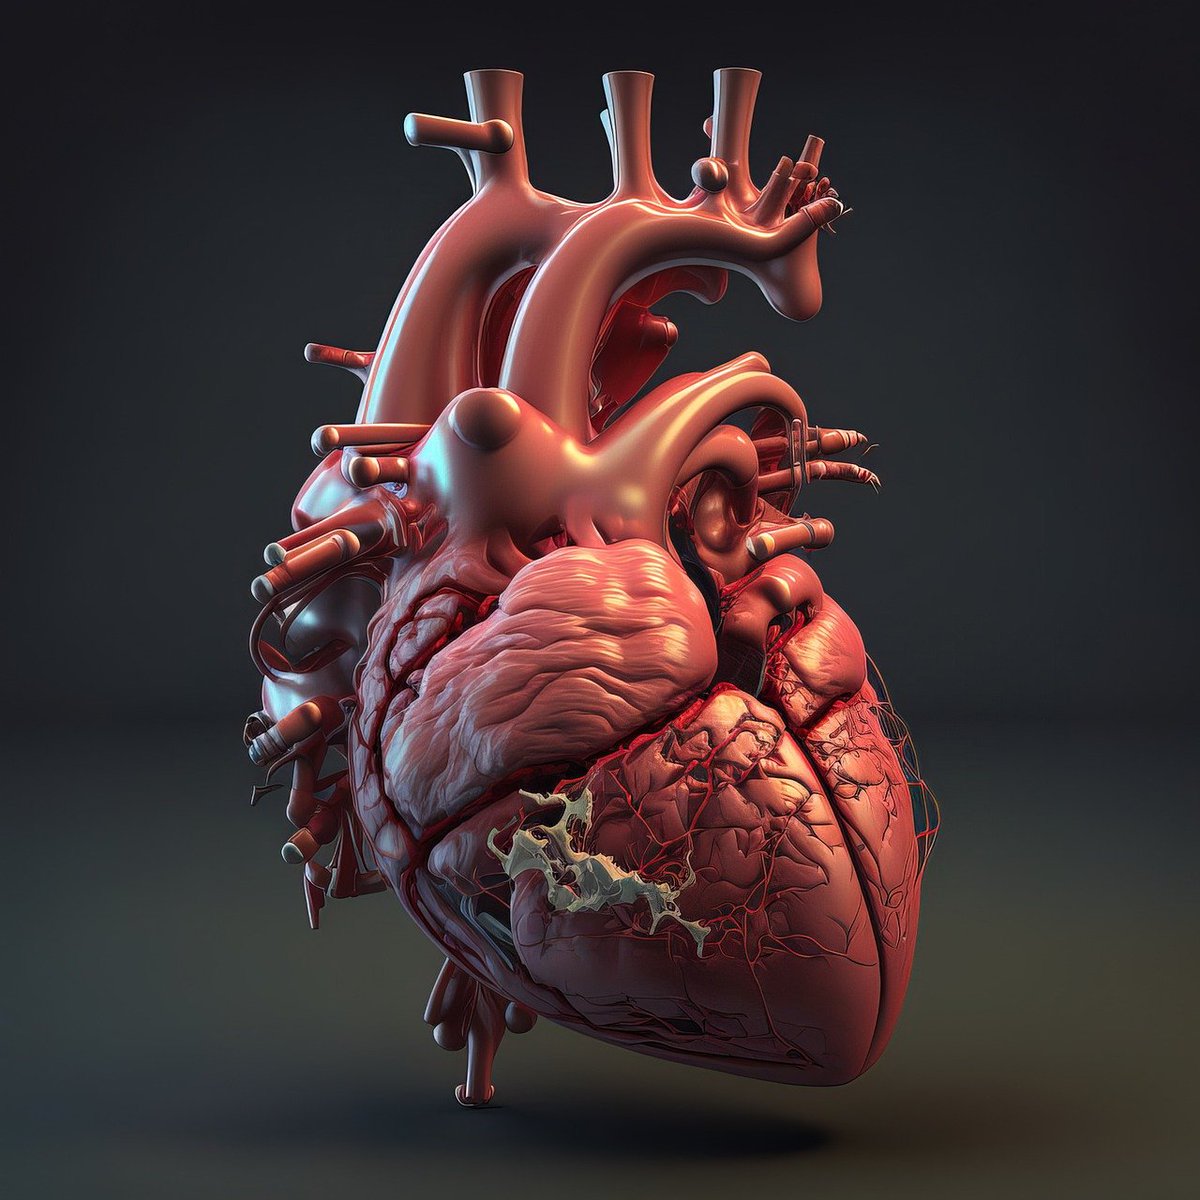 Bin Wang, Yanhui Su, Cong Ma and colleagues investigate perioperative low-molecular-weight heparin therapy on clinical events on individuals who have received coronary stents. Read the full study here: bmcmedicine.biomedcentral.com/articles/10.11…